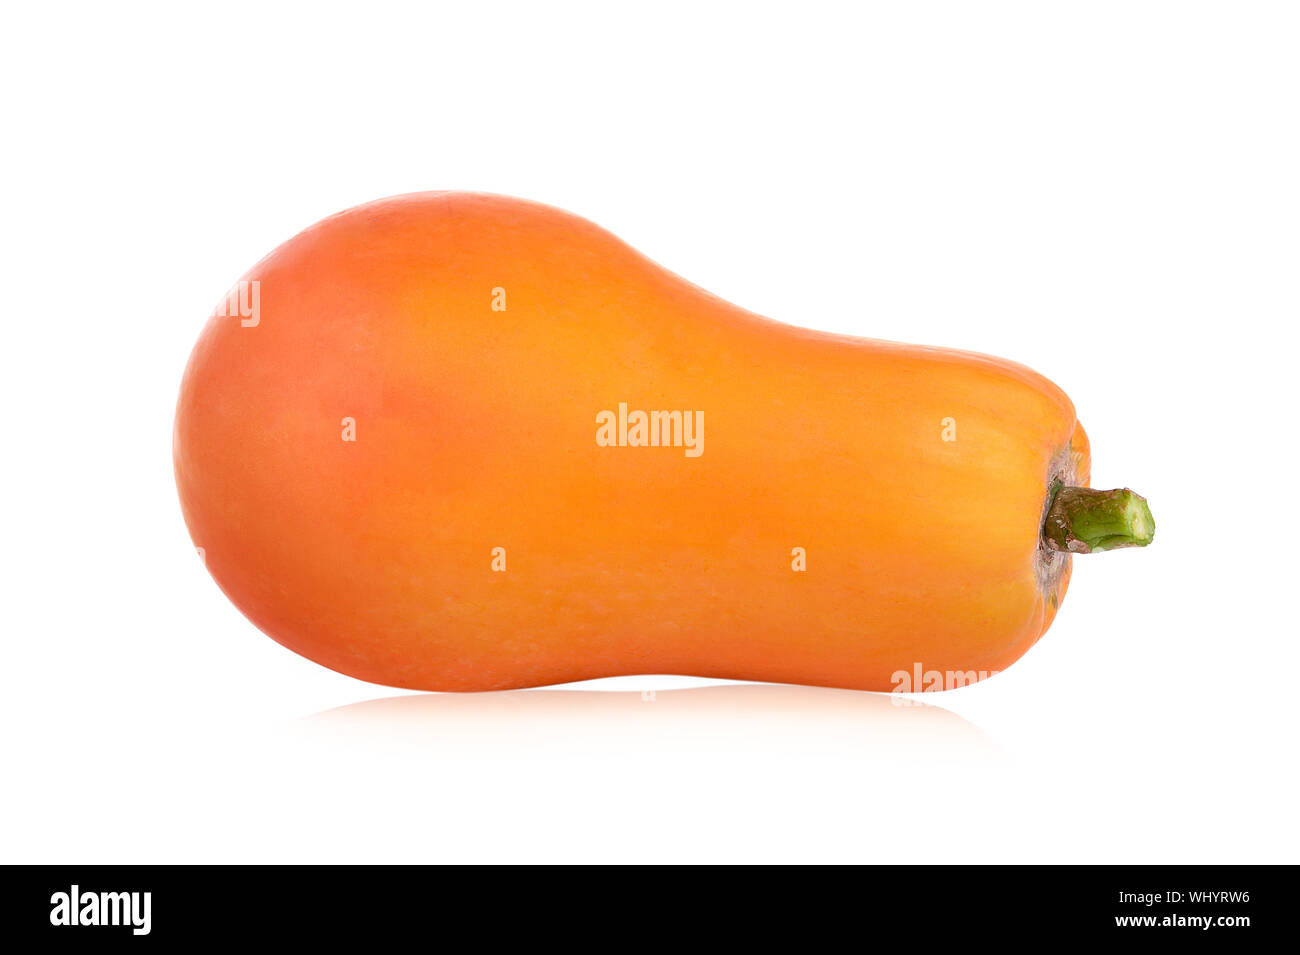 Single squash or pumpkin, isolated over a white background. Stock Photo